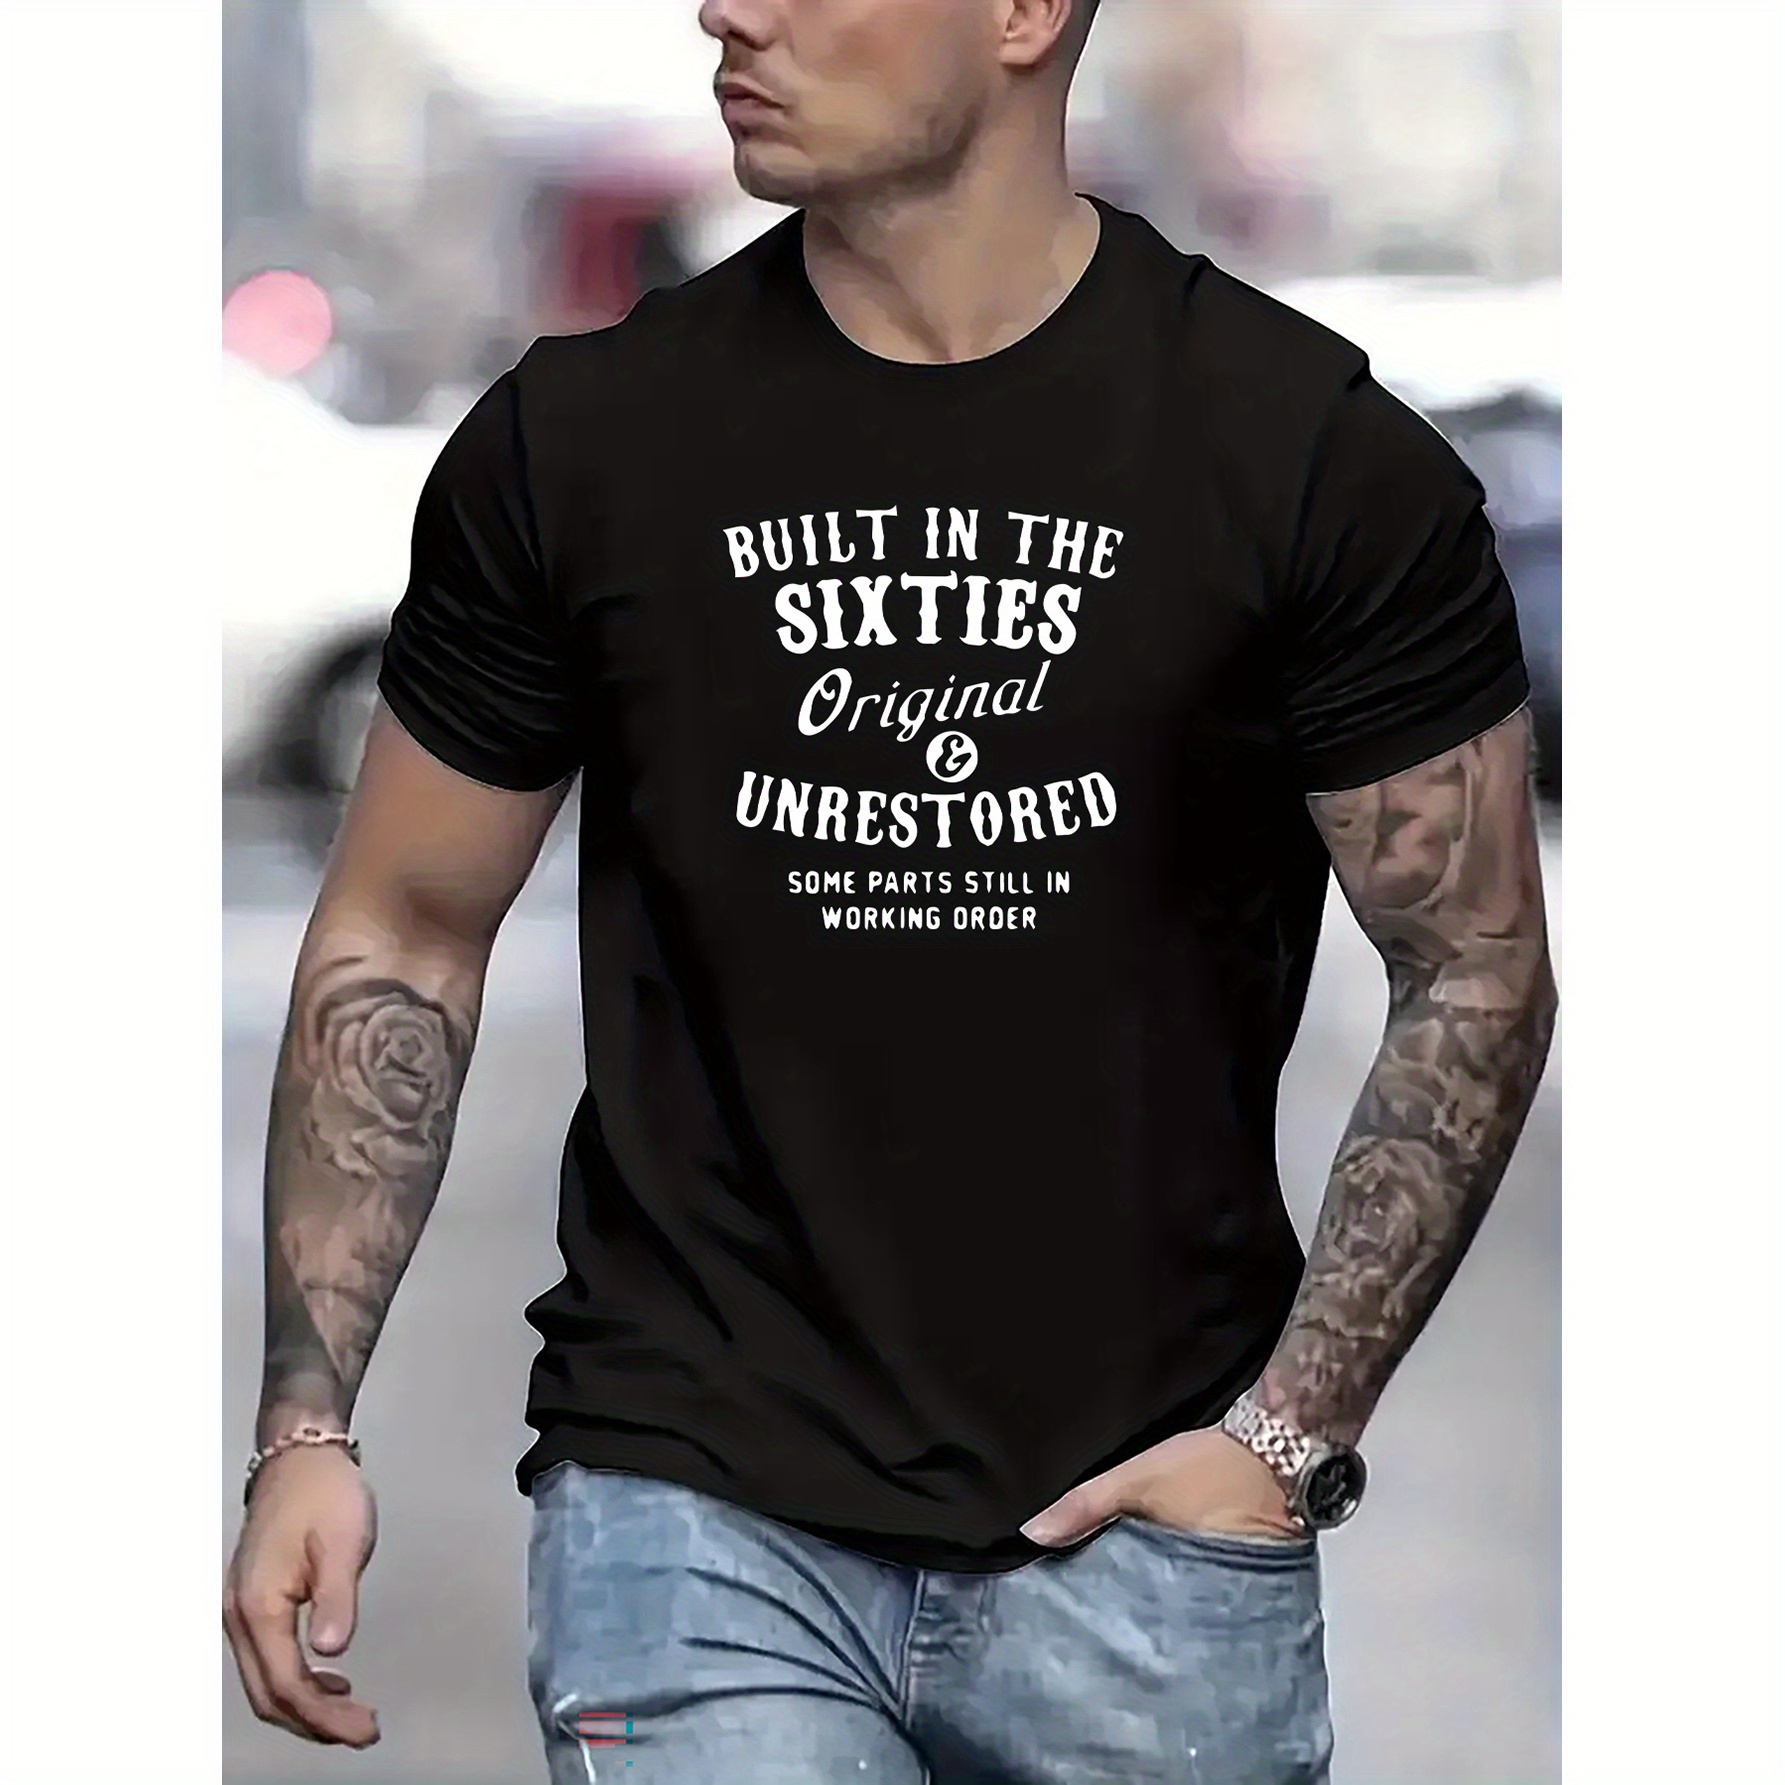 

Built In The Sixties Print, Men's Round Crew Neck Short Sleeve, Simple Style Tee Fashion Regular Fit T-shirt, Casual Comfy Top For Spring Summer Holiday Leisure Vacation Men's Clothing As Gift